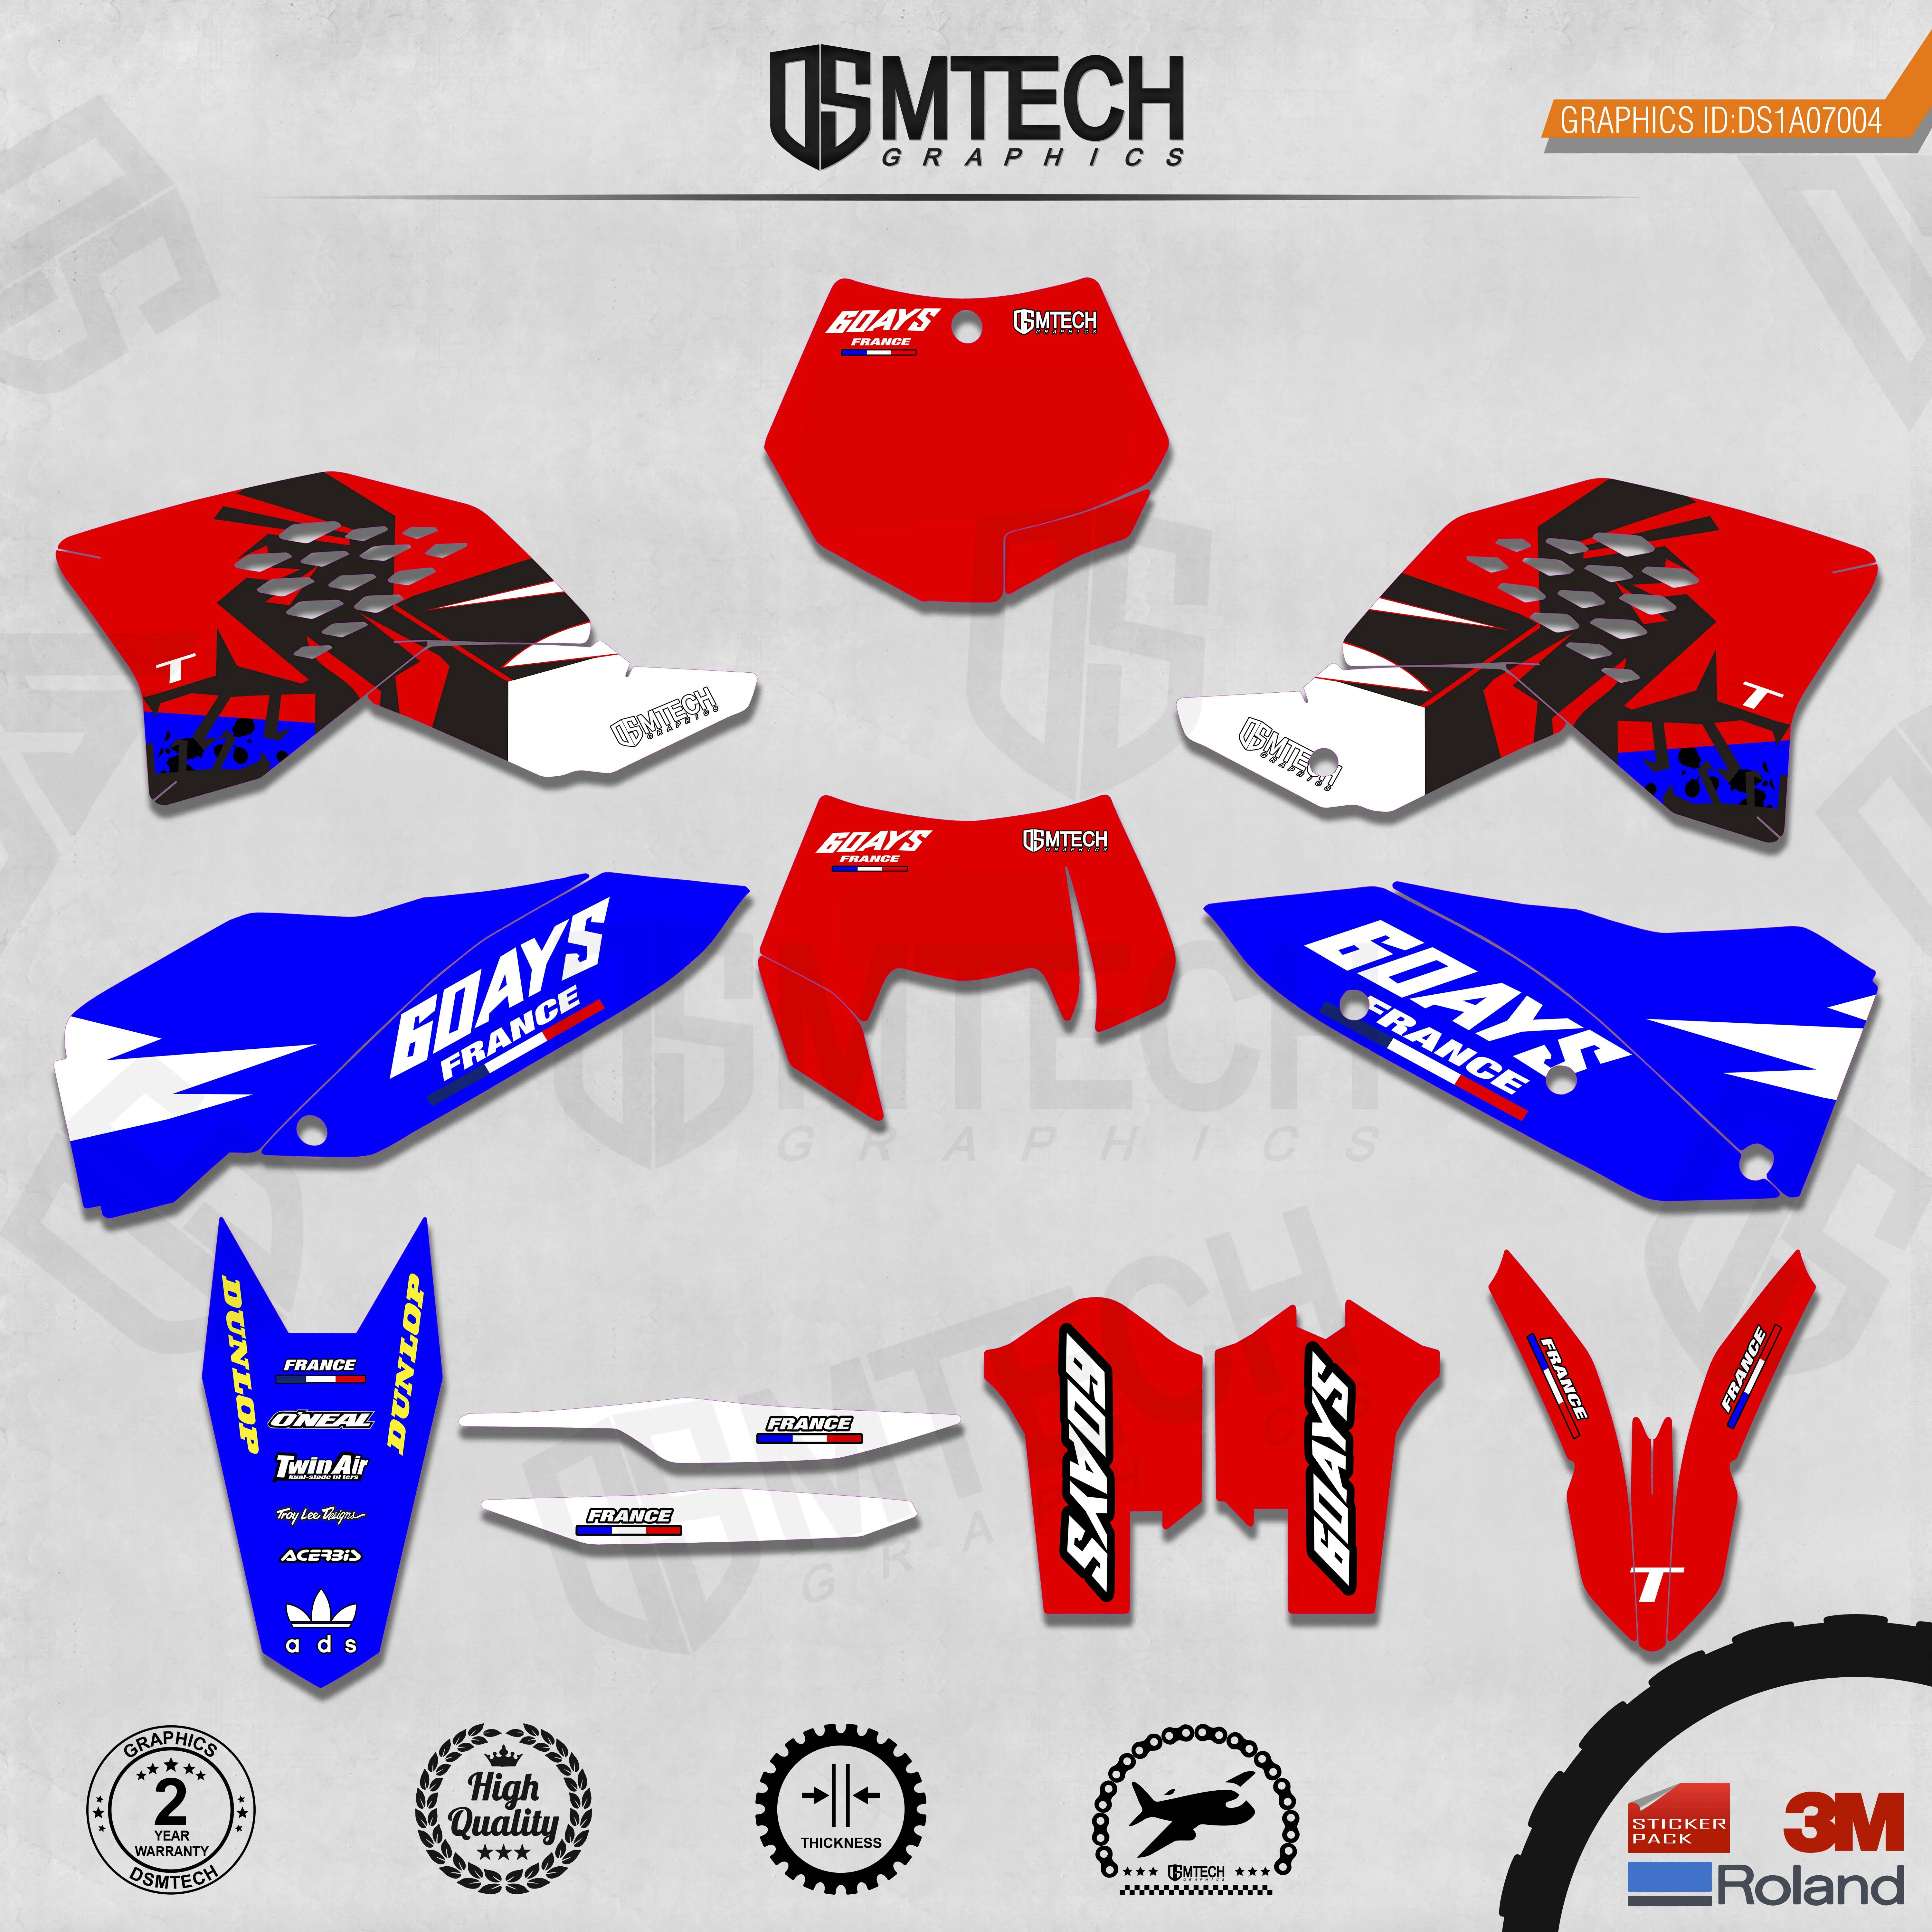 DSMTECH Customized Team Graphics Backgrounds Decals 3M Custom Stickers For 2007-2010 SXF  2008-2011 EXC  004